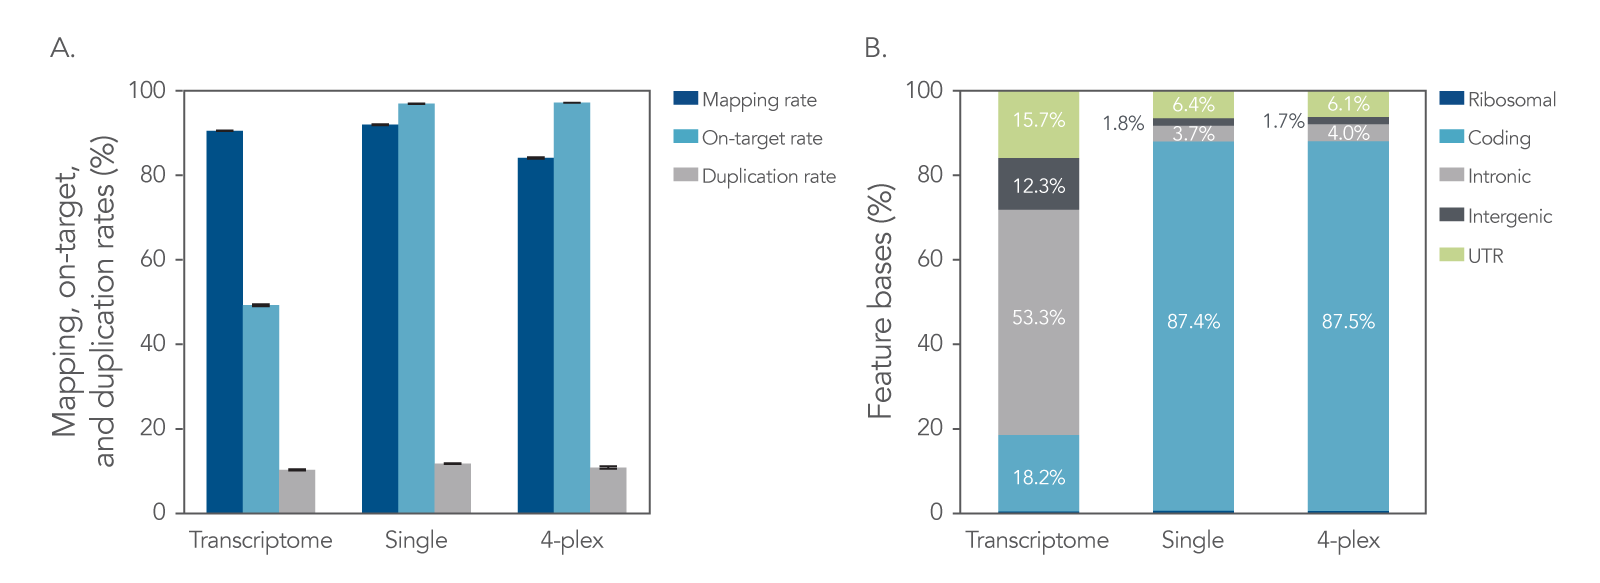 Target enrichment of FFPE RNA samples have high mapping, on-target percentage, and low duplication rate. 